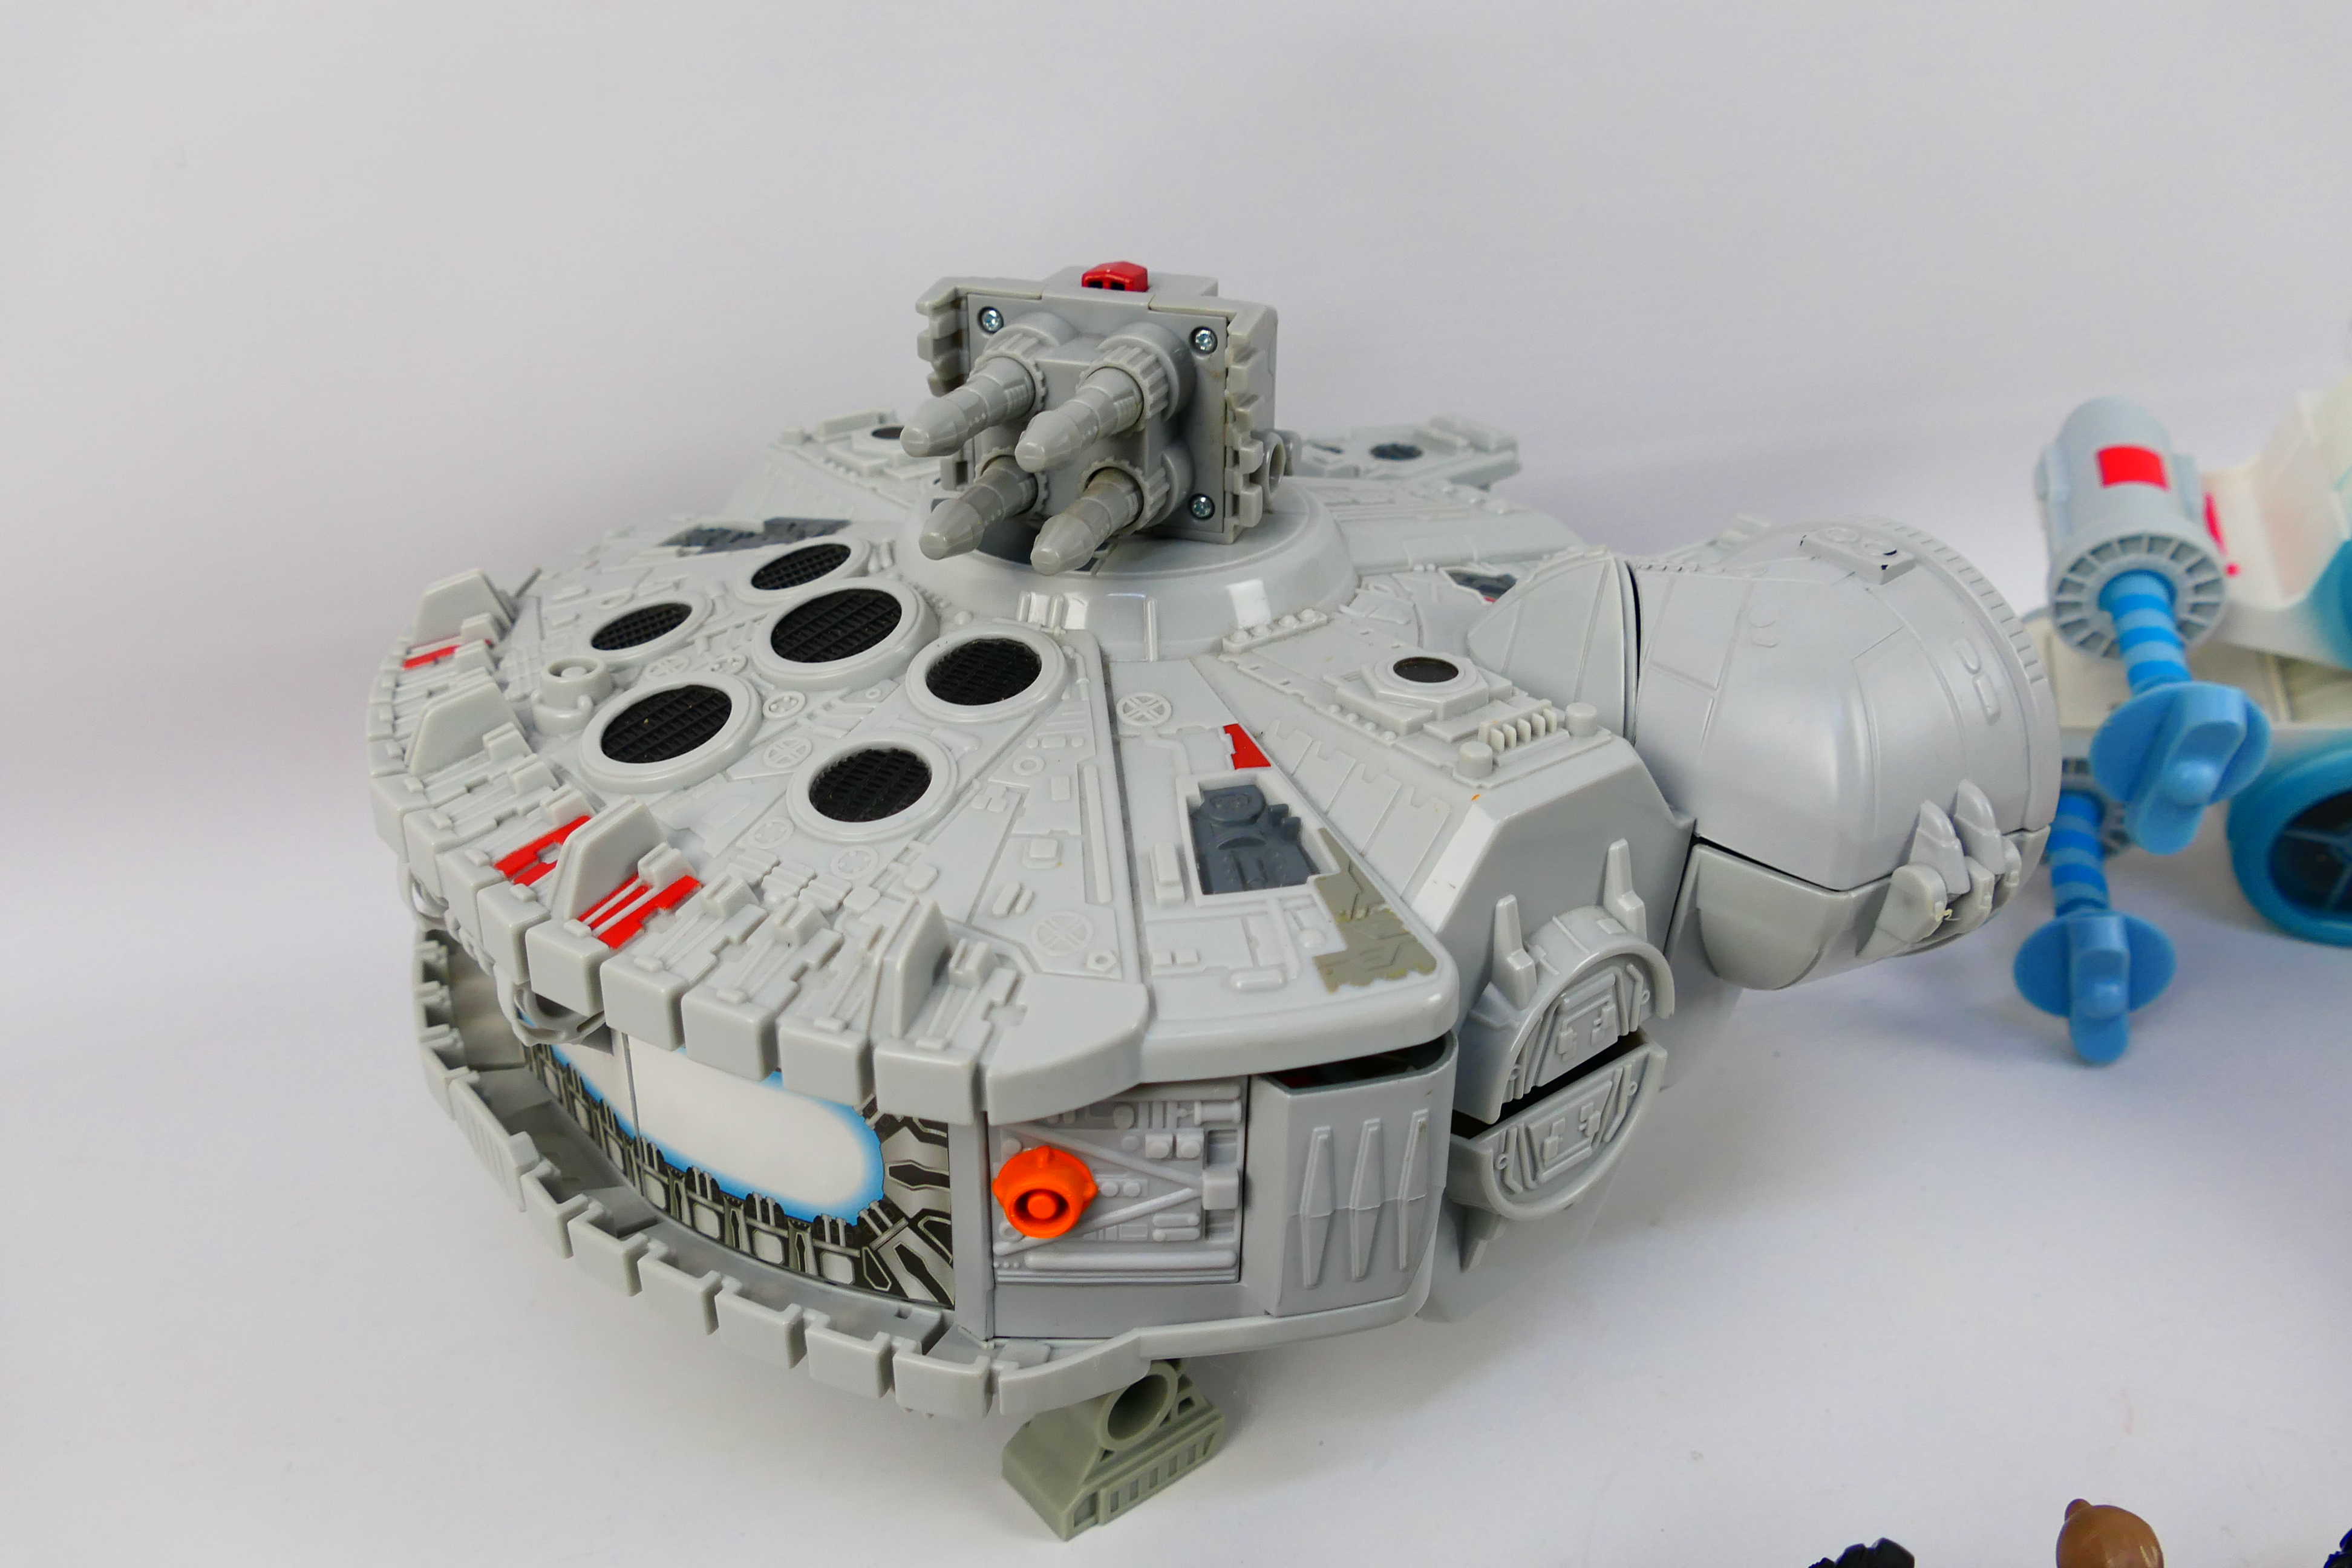 Hasbro - Star Wars - A Star Wars Millennium Falcon Plat Set with figures including Hans, - Image 8 of 13